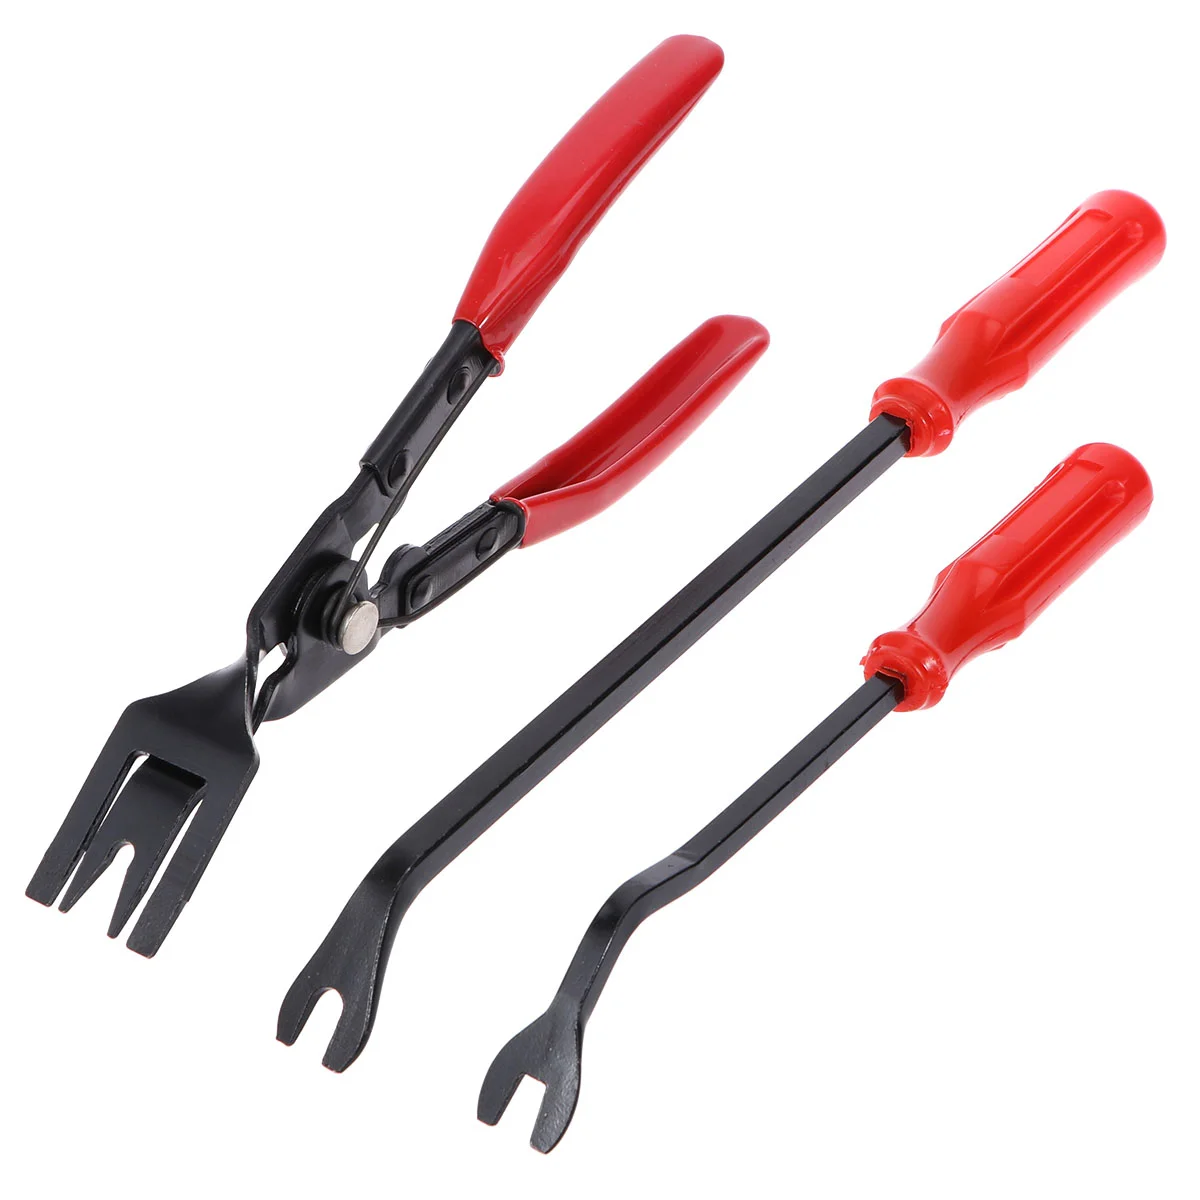 

Vosarea Auto Trim Removal Tool Door Panel Removal Tools for Dash Center Console Installation and Remover 3pcs